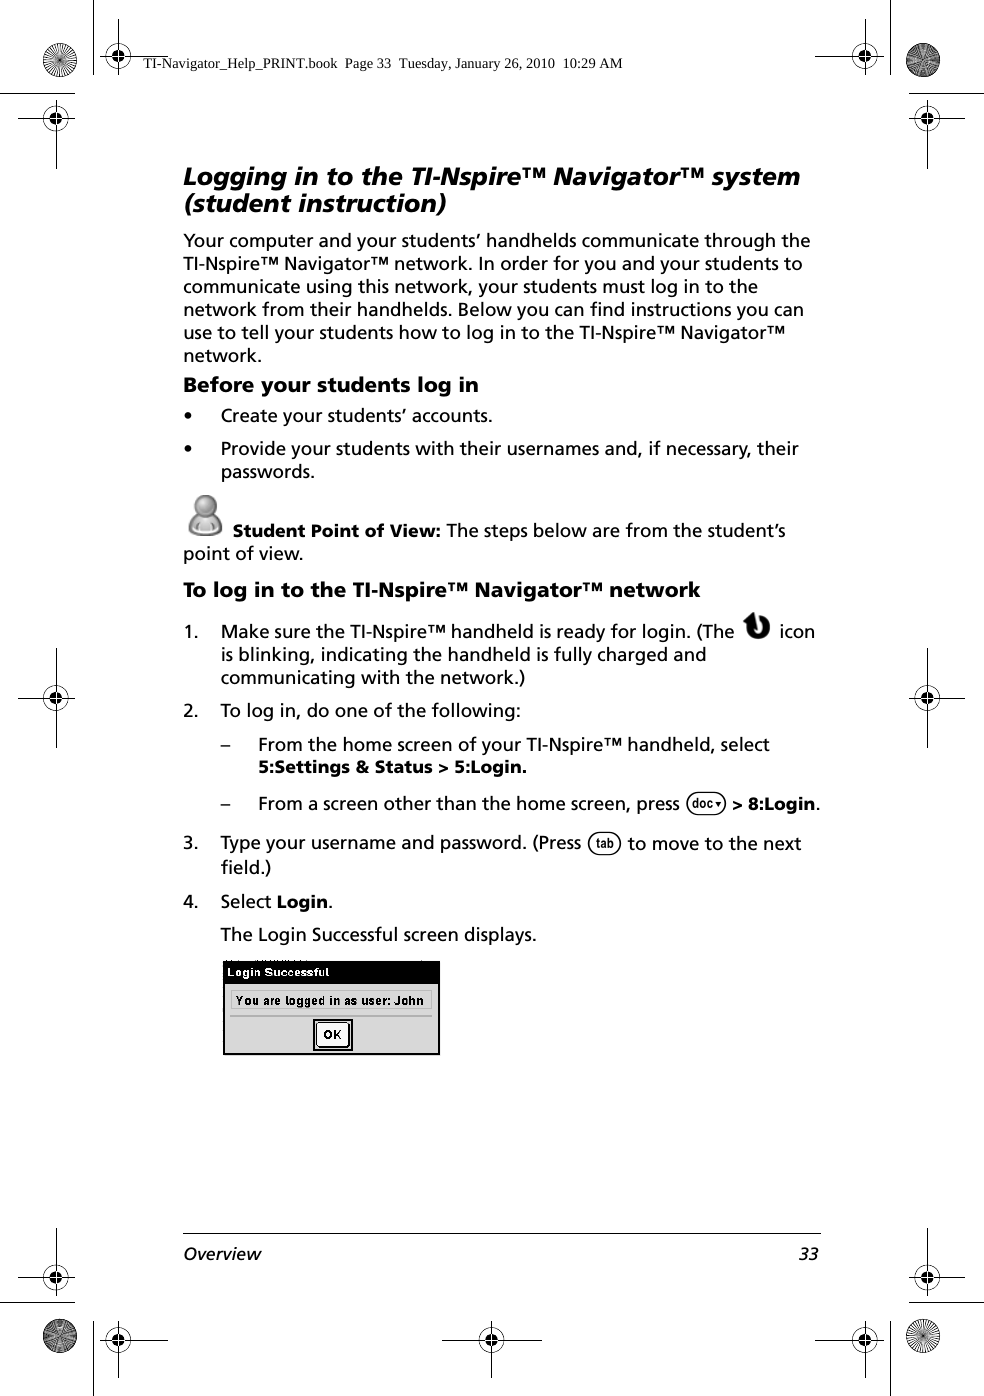 Overview 33Logging in to the TI-Nspire™ Navigator™ system (student instruction)Your computer and your students’ handhelds communicate through the TI-Nspire™ Navigator™ network. In order for you and your students to communicate using this network, your students must log in to the network from their handhelds. Below you can find instructions you can use to tell your students how to log in to the TI-Nspire™ Navigator™ network.Before your students log in• Create your students’ accounts.• Provide your students with their usernames and, if necessary, their passwords. Student Point of View: The steps below are from the student’s point of view.To log in to the TI-Nspire™ Navigator™ network1. Make sure the TI-Nspire™ handheld is ready for login. (The  icon is blinking, indicating the handheld is fully charged and communicating with the network.)2. To log in, do one of the following:– From the home screen of your TI-Nspire™ handheld, select 5:Settings &amp; Status &gt; 5:Login.– From a screen other than the home screen, press ~ &gt; 8:Login.3. Type your username and password. (Press e to move to the next field.)4. Select Login.The Login Successful screen displays.TI-Navigator_Help_PRINT.book  Page 33  Tuesday, January 26, 2010  10:29 AM